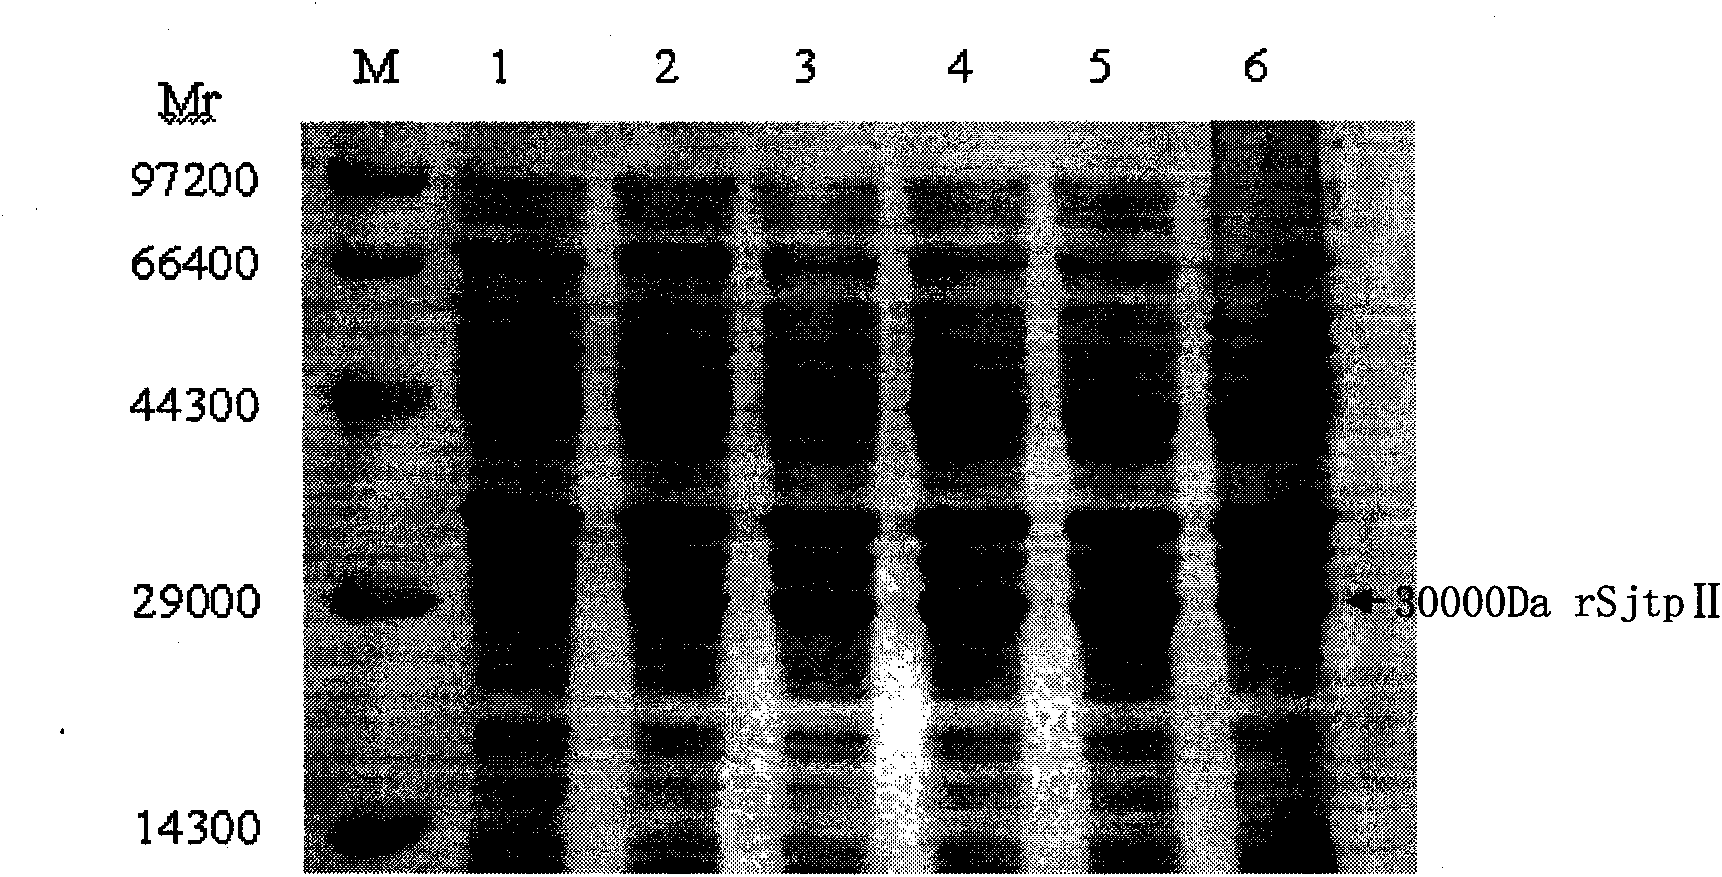 Recombinant expression carrier containing schistosoma japonicum gene and application thereof